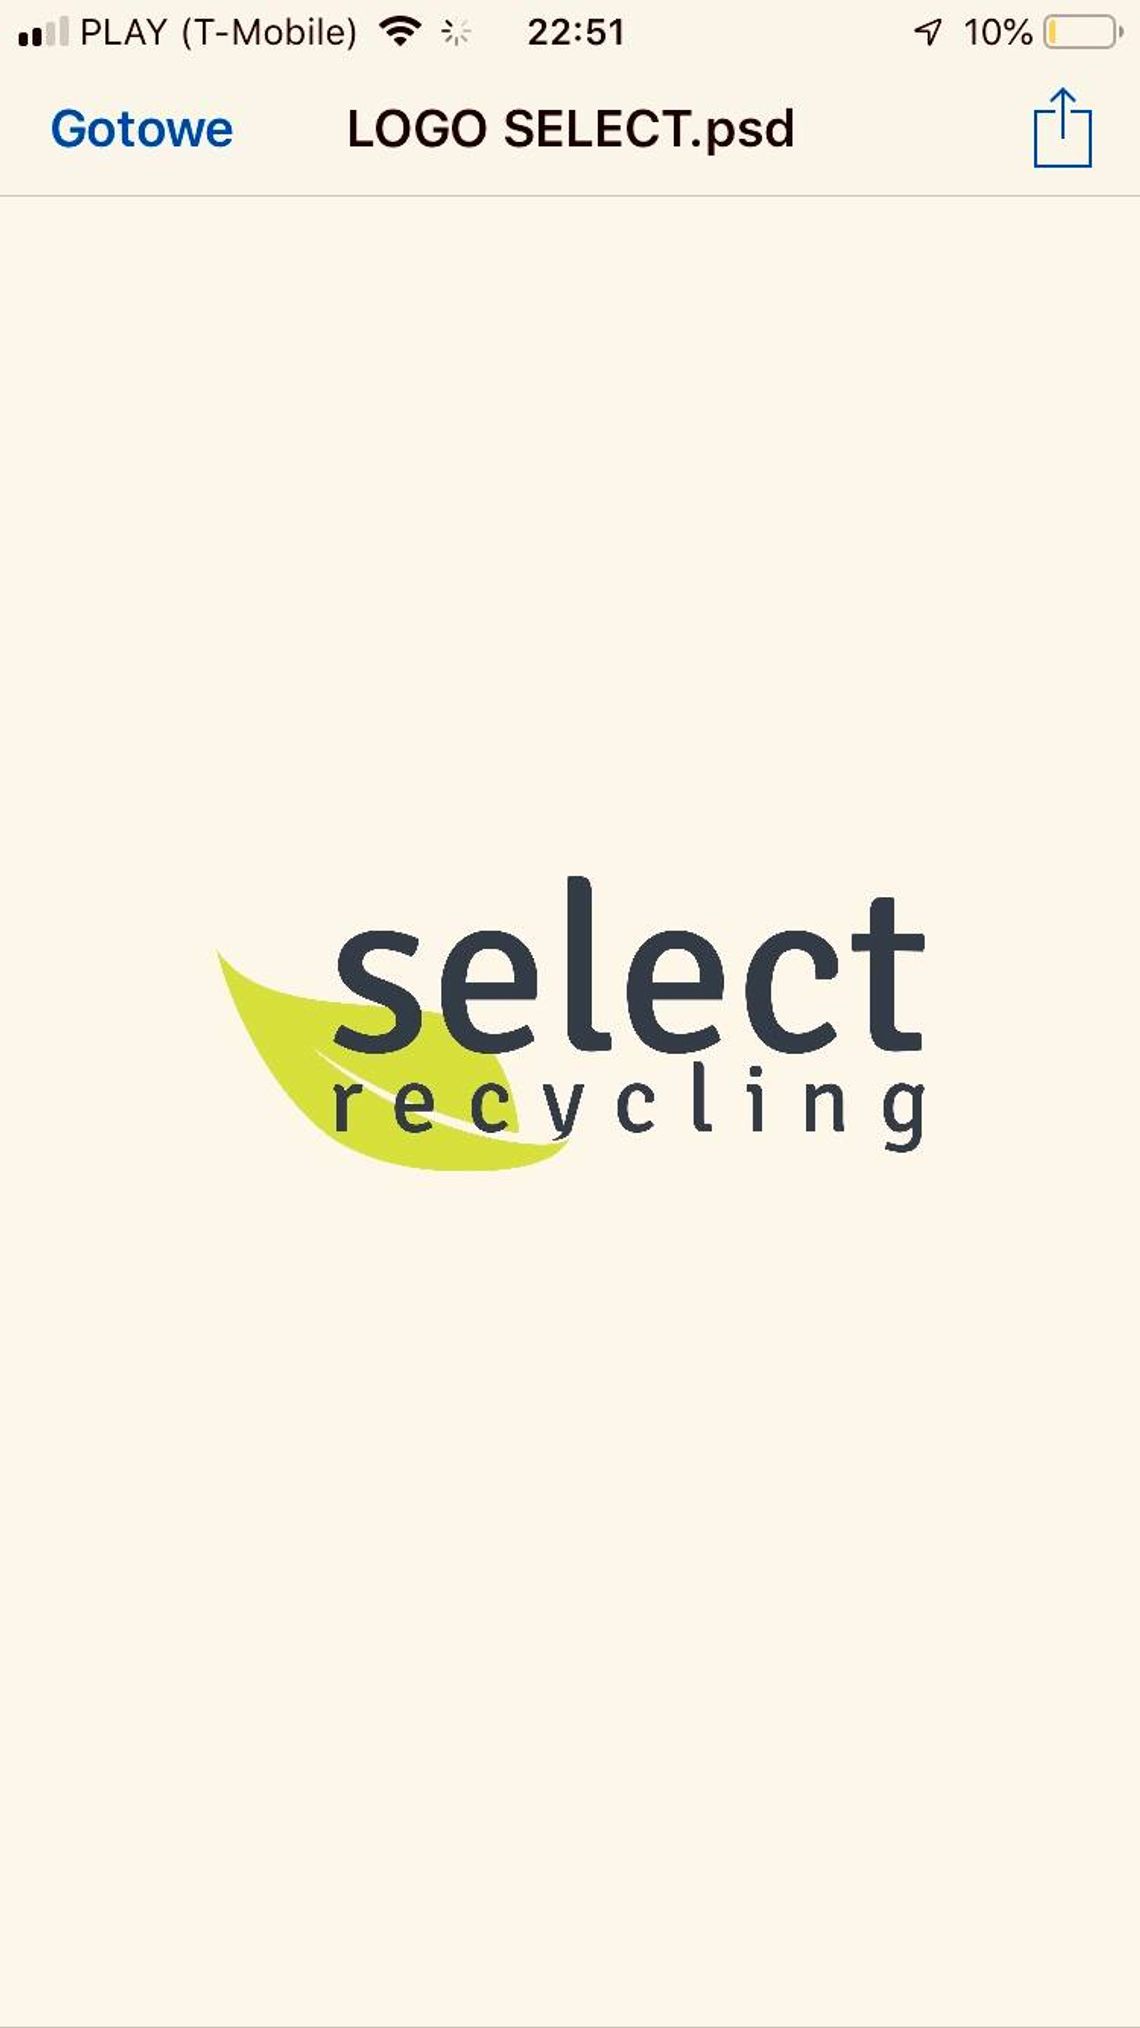 Select Recycling